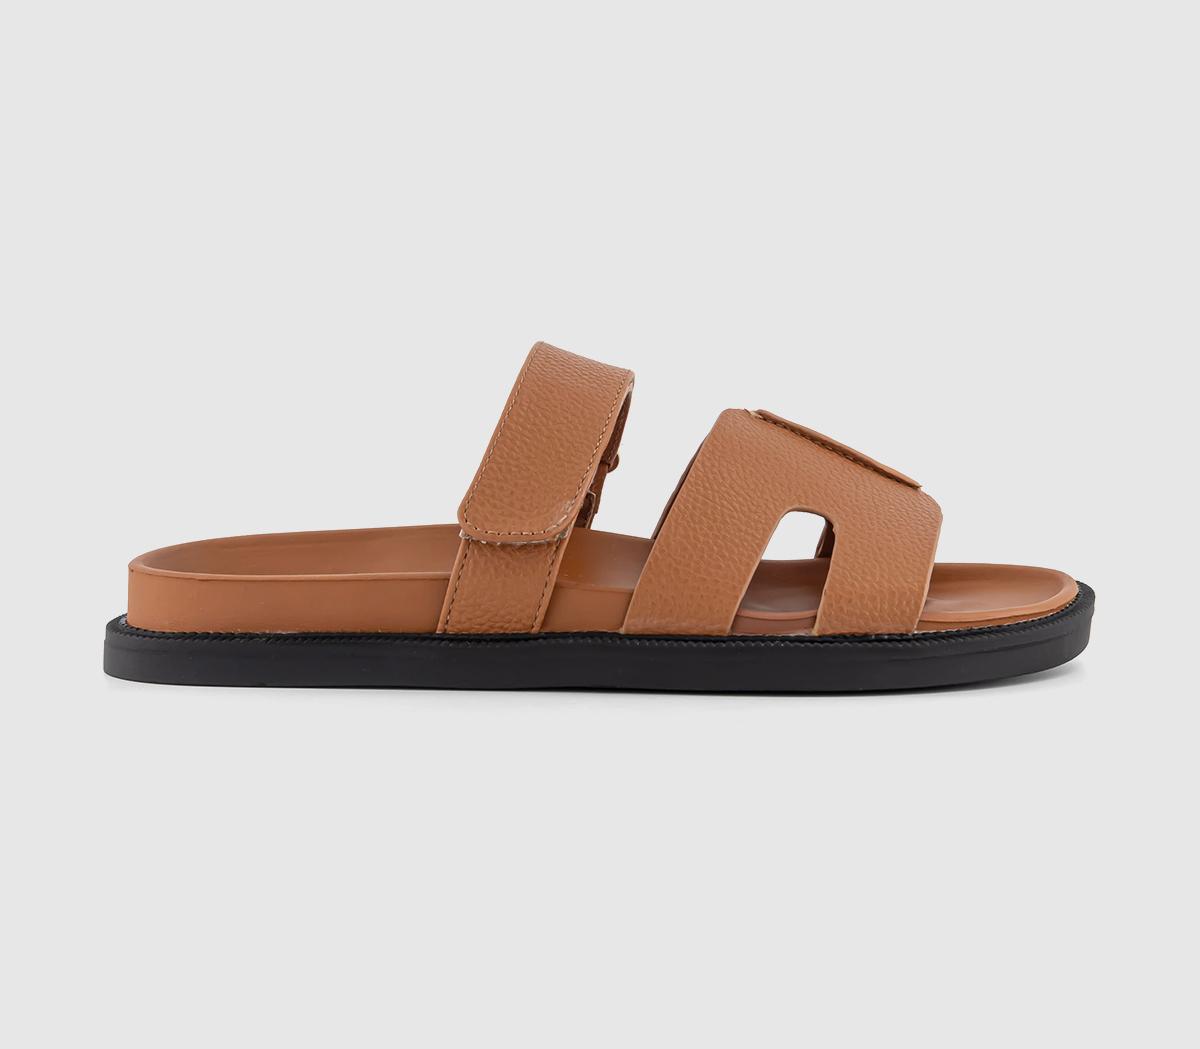 OFFICESerena Cut Out Two Strap Footbed SandalsTan